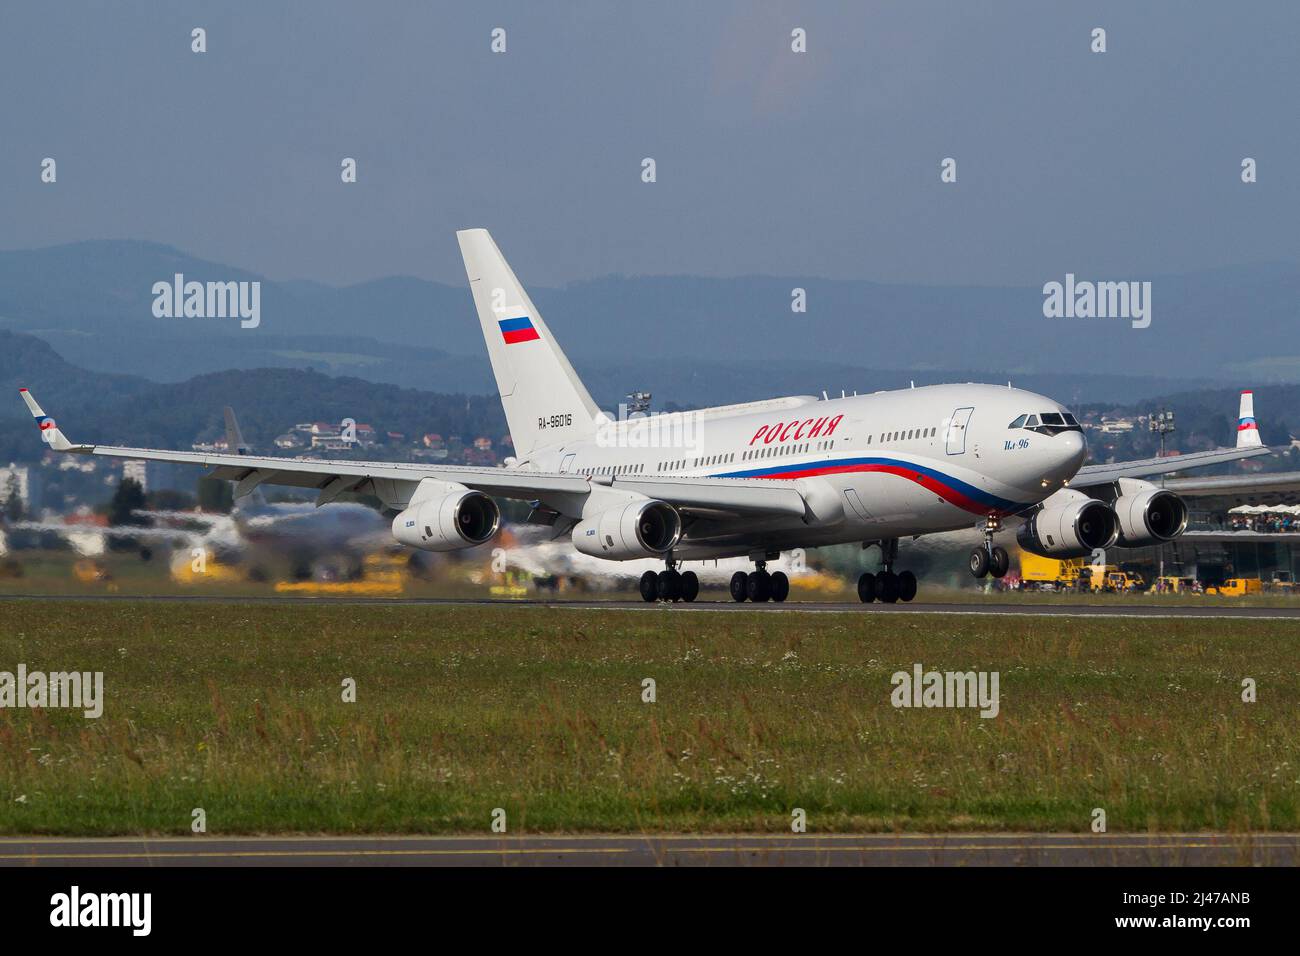 Presidential aircraft of russian president Vladimir Putin departing Graz, Austria after a state visit Stock Photo